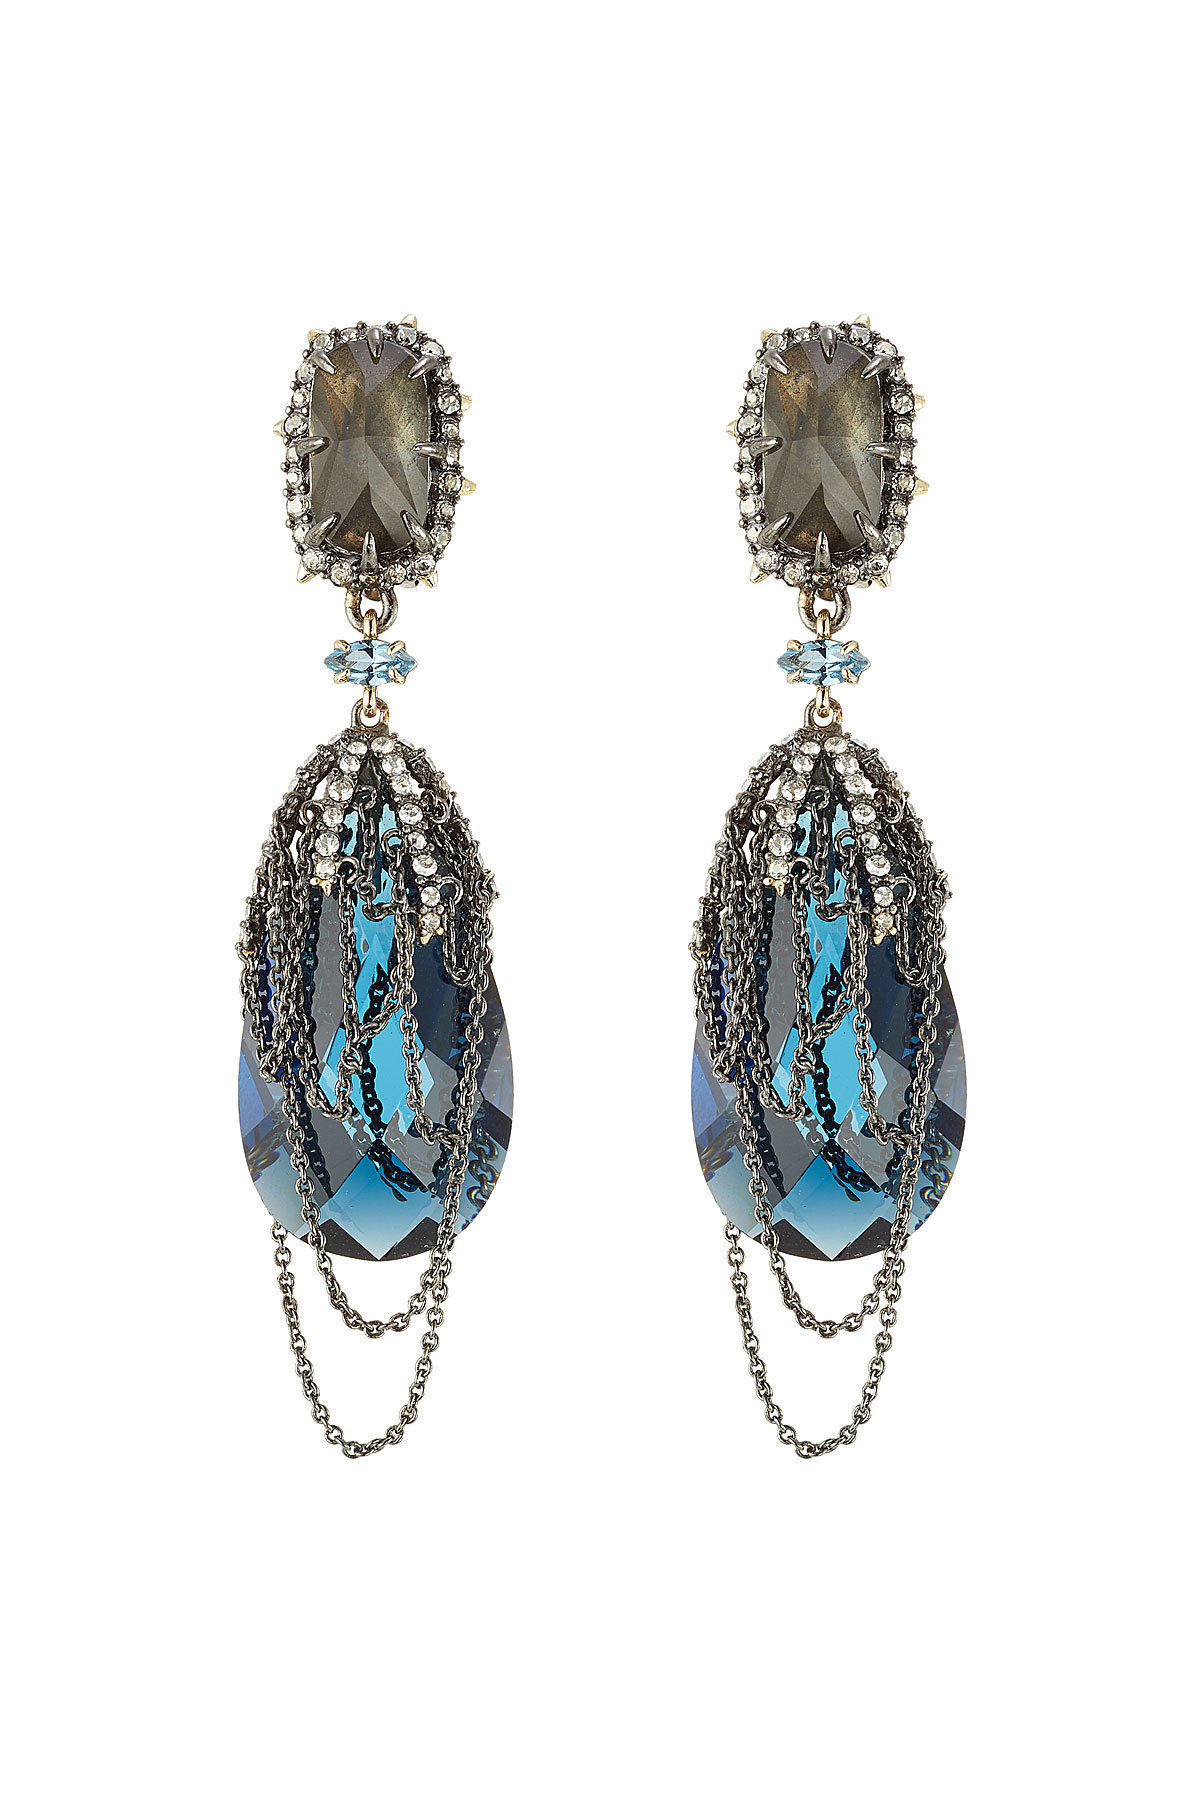 Draped Chain and Crystal Earrings by Alexis Bittar